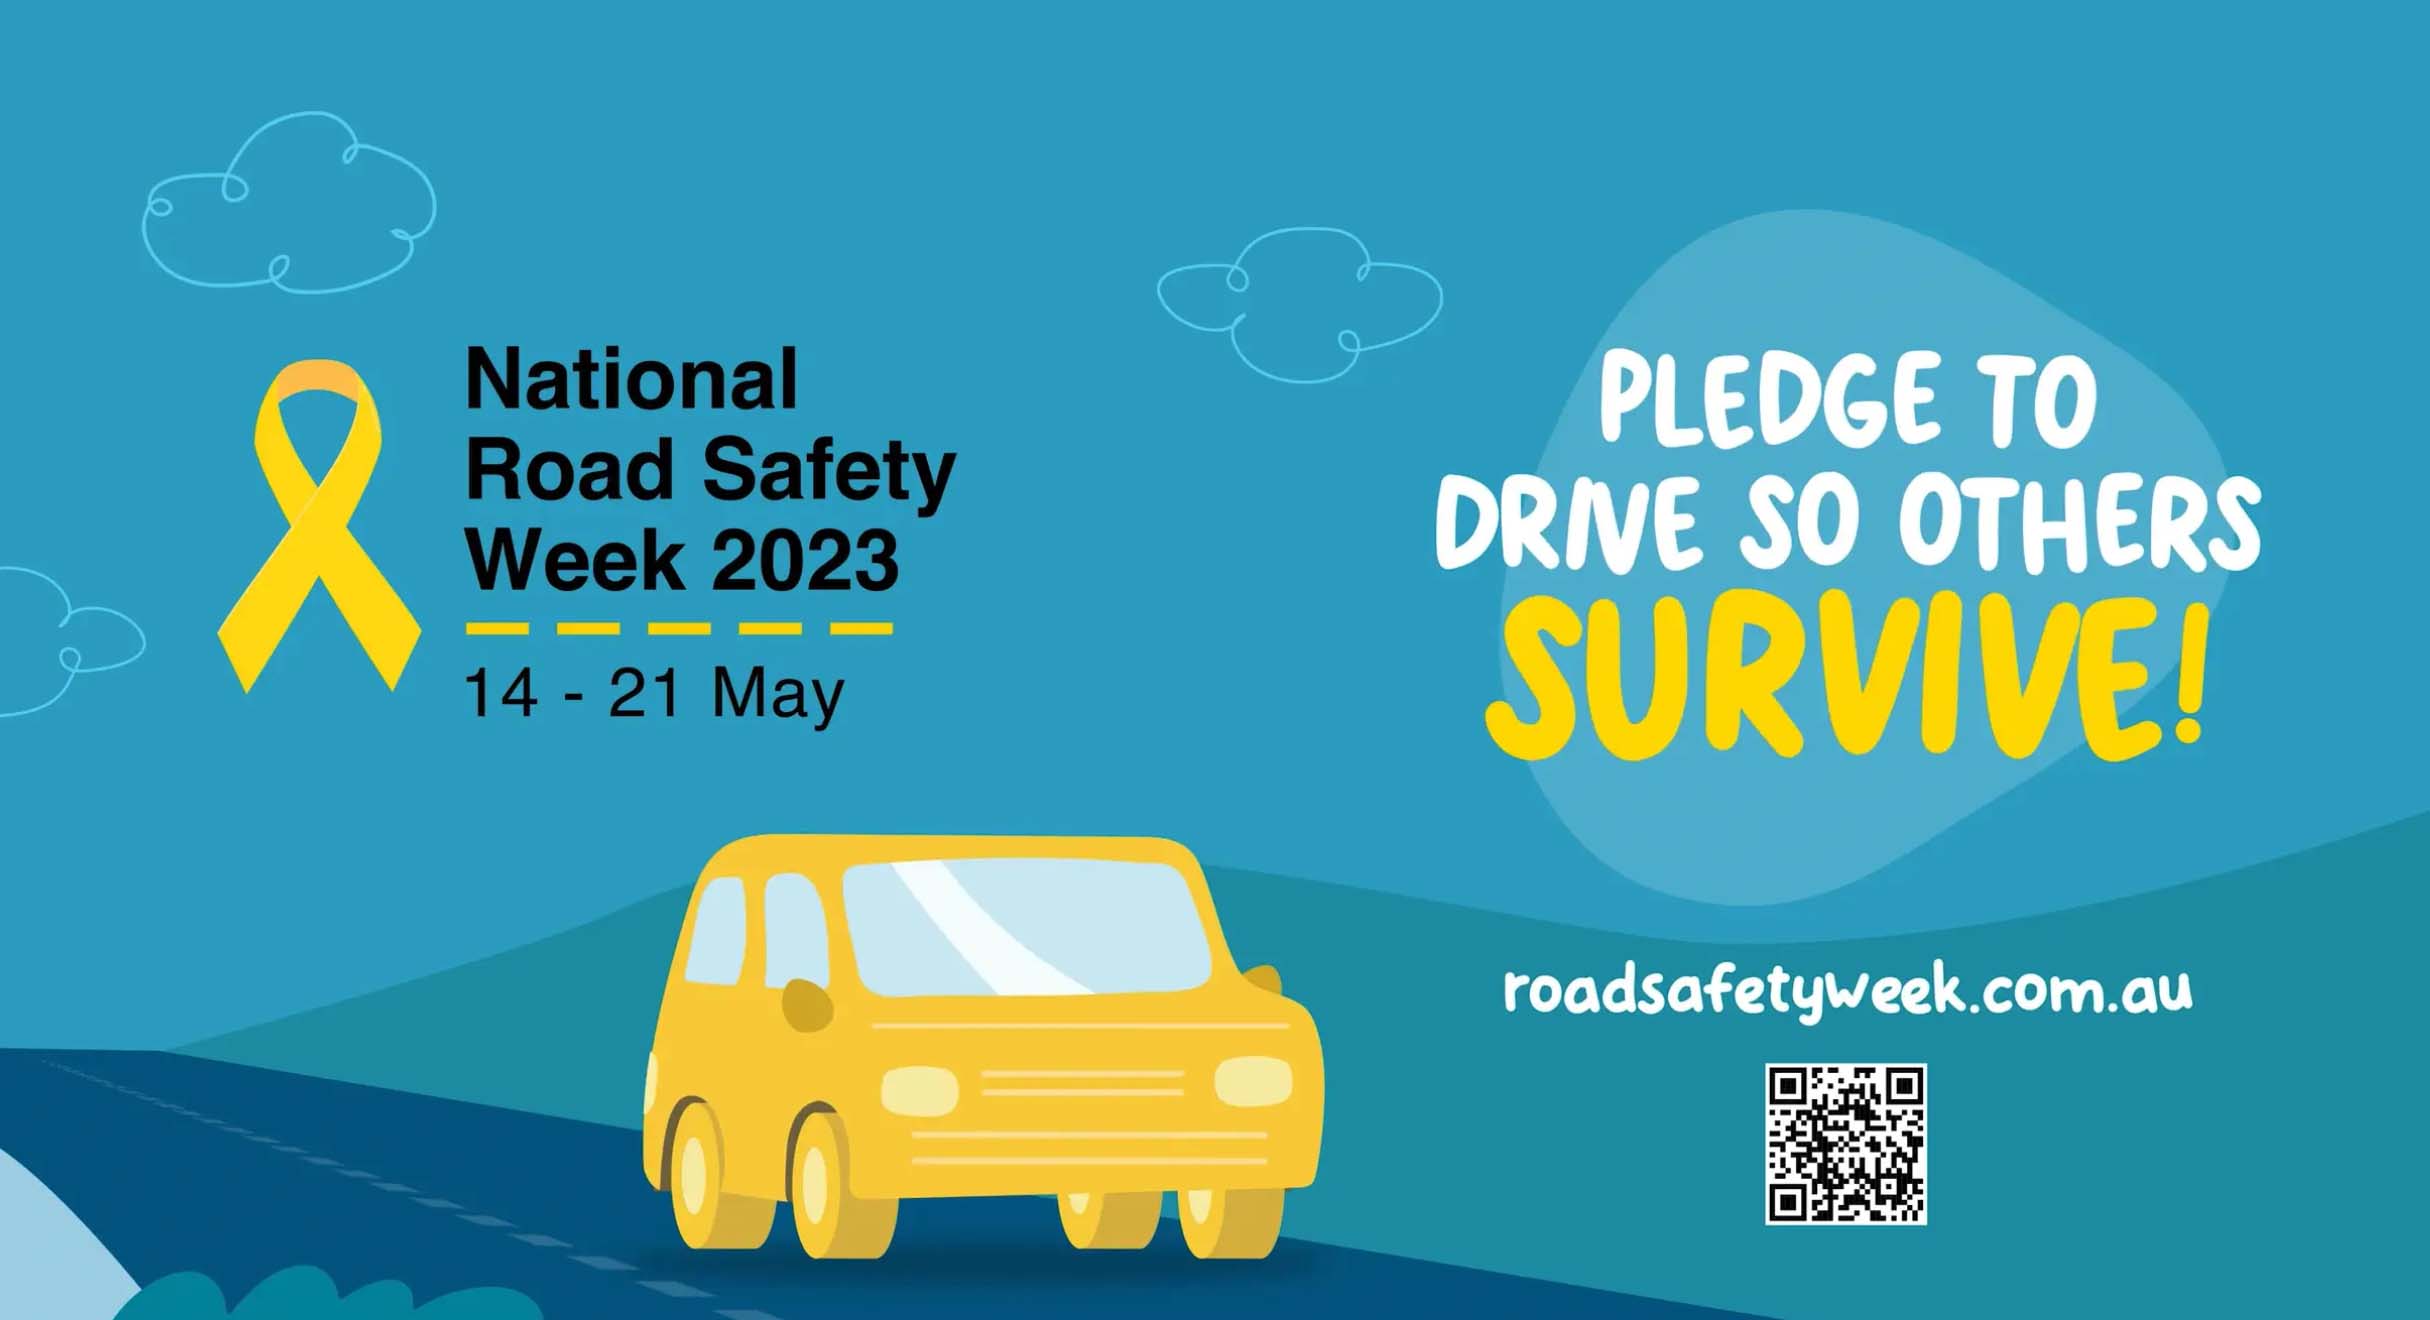 Pledge to Drive so others survive